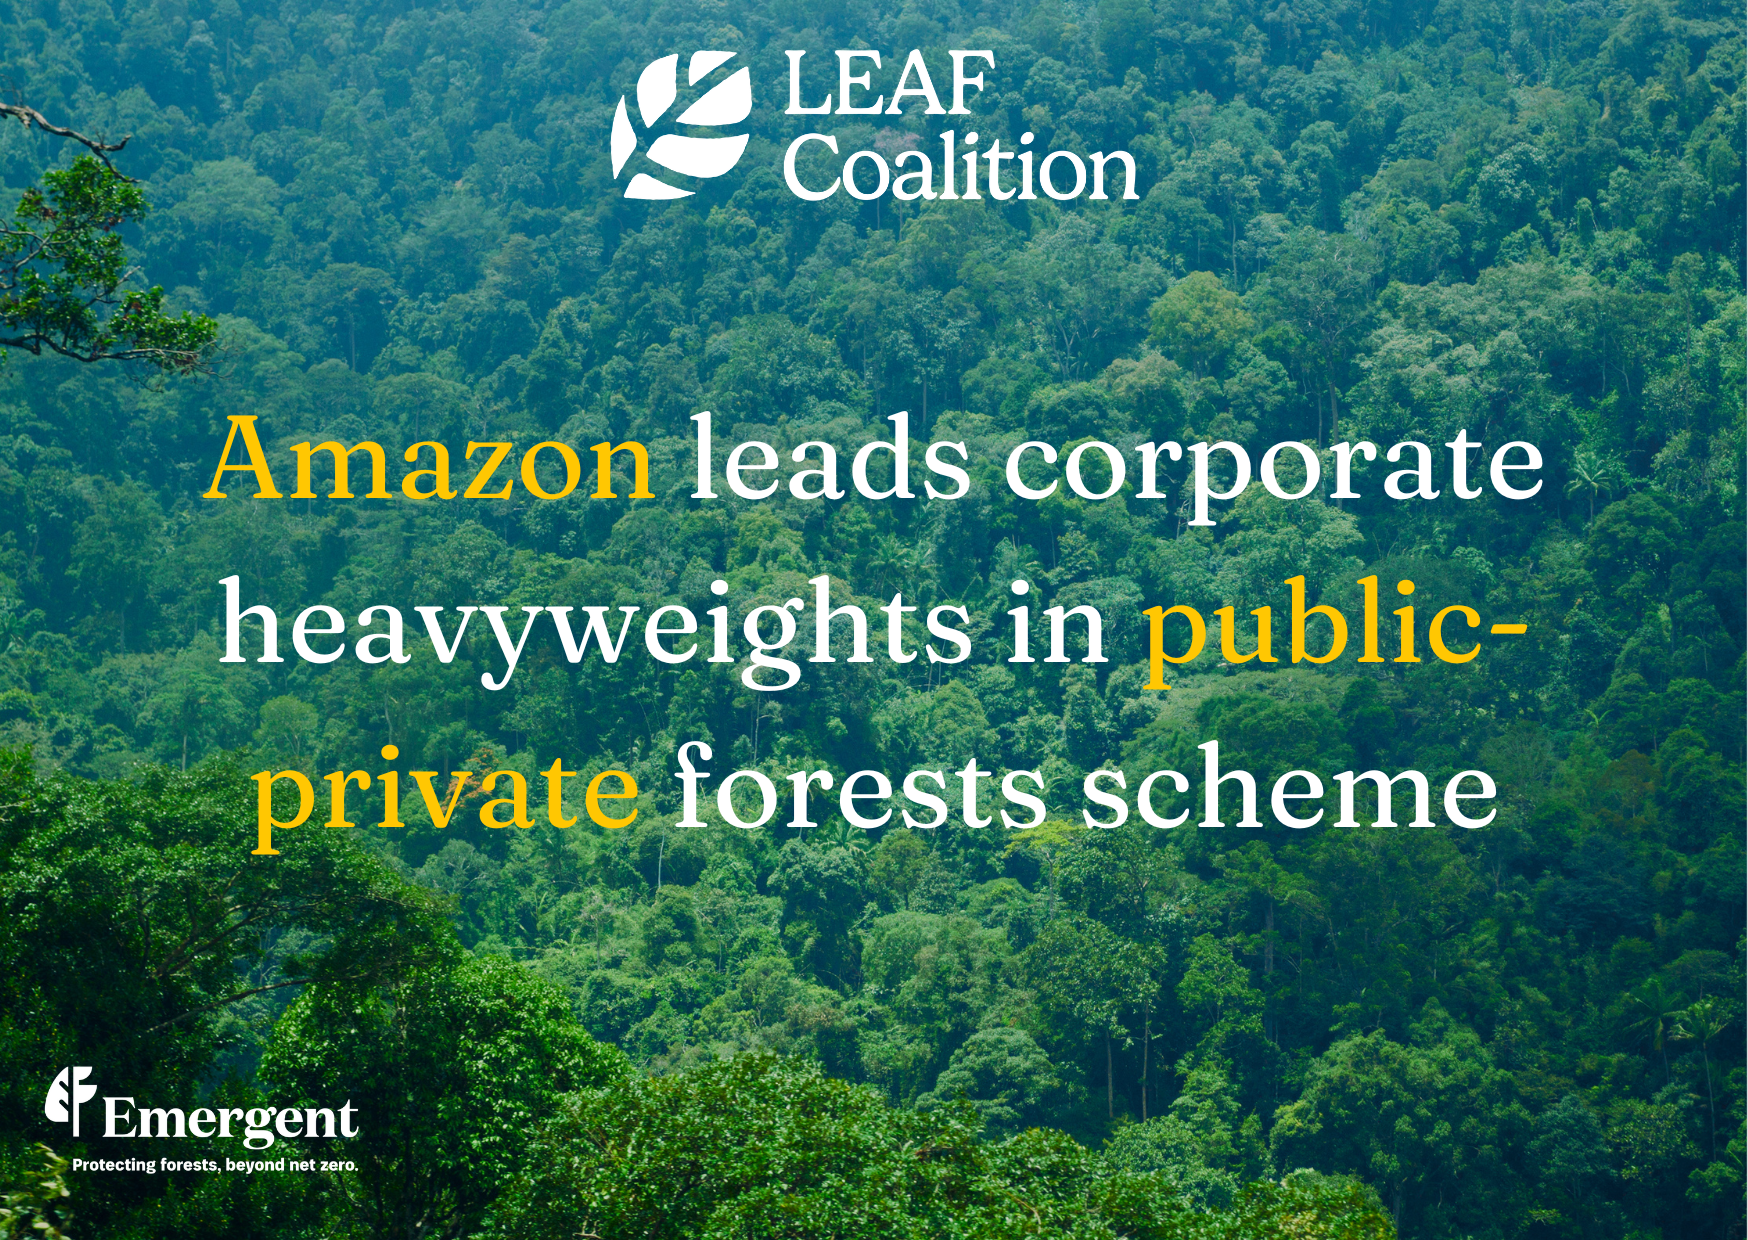 Amazon leads corporate heavyweights in public-private forests scheme